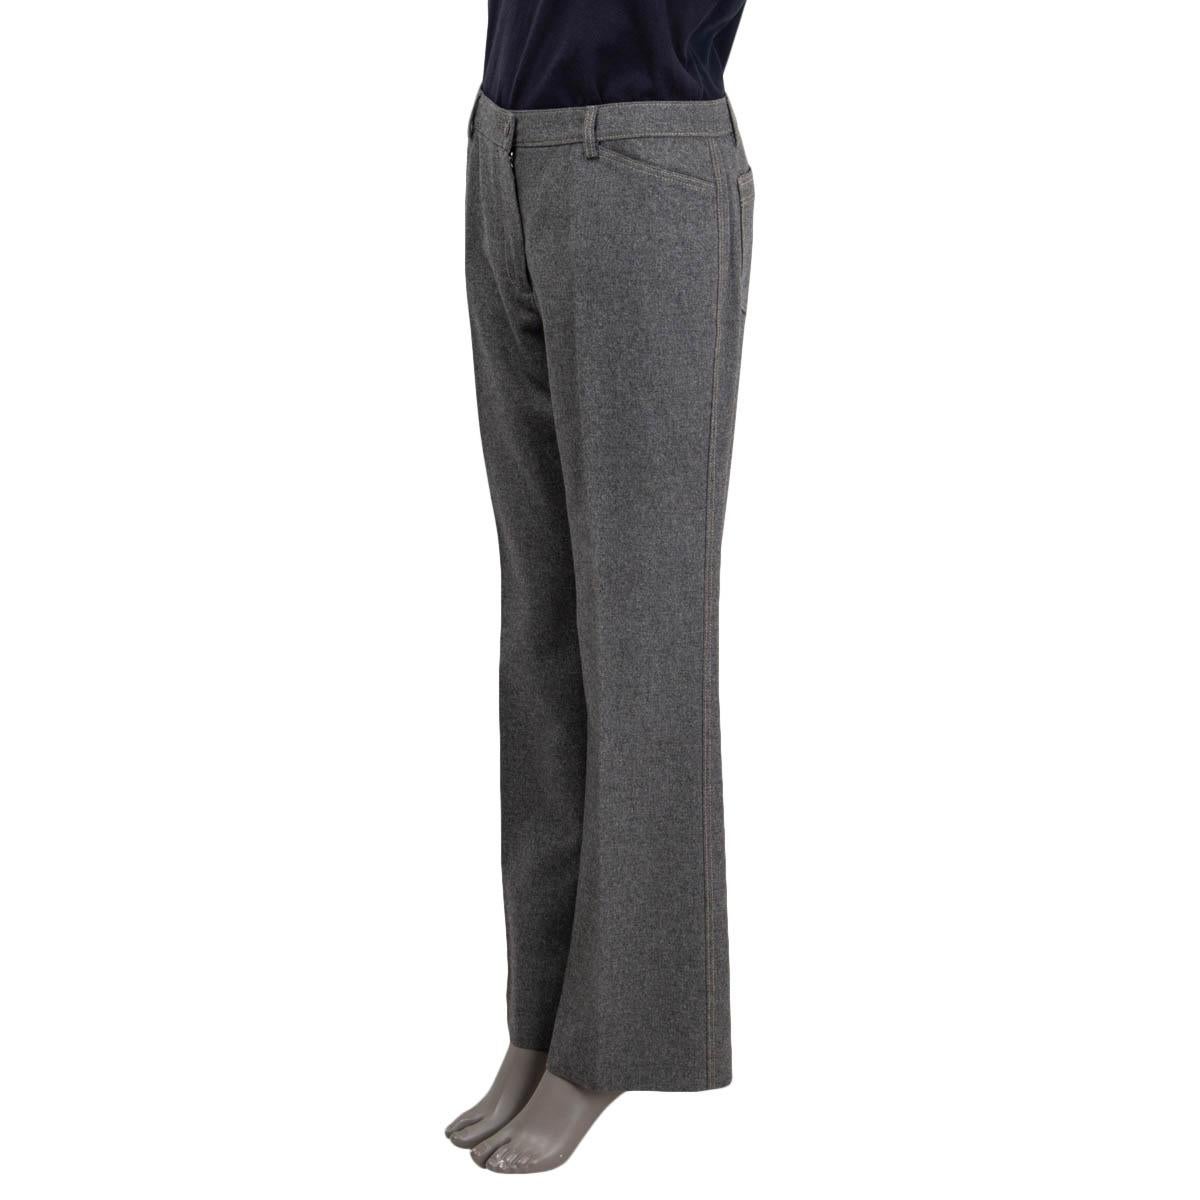 100% authentic Chanel 2005 wide-leg pants in gray wool (100%) with belt loops, two pockets on the sides, and two patch pockets on the back. Close with a Chanel logo button and a concealed zipper on the front. Lined in gray silk (100%). Have been